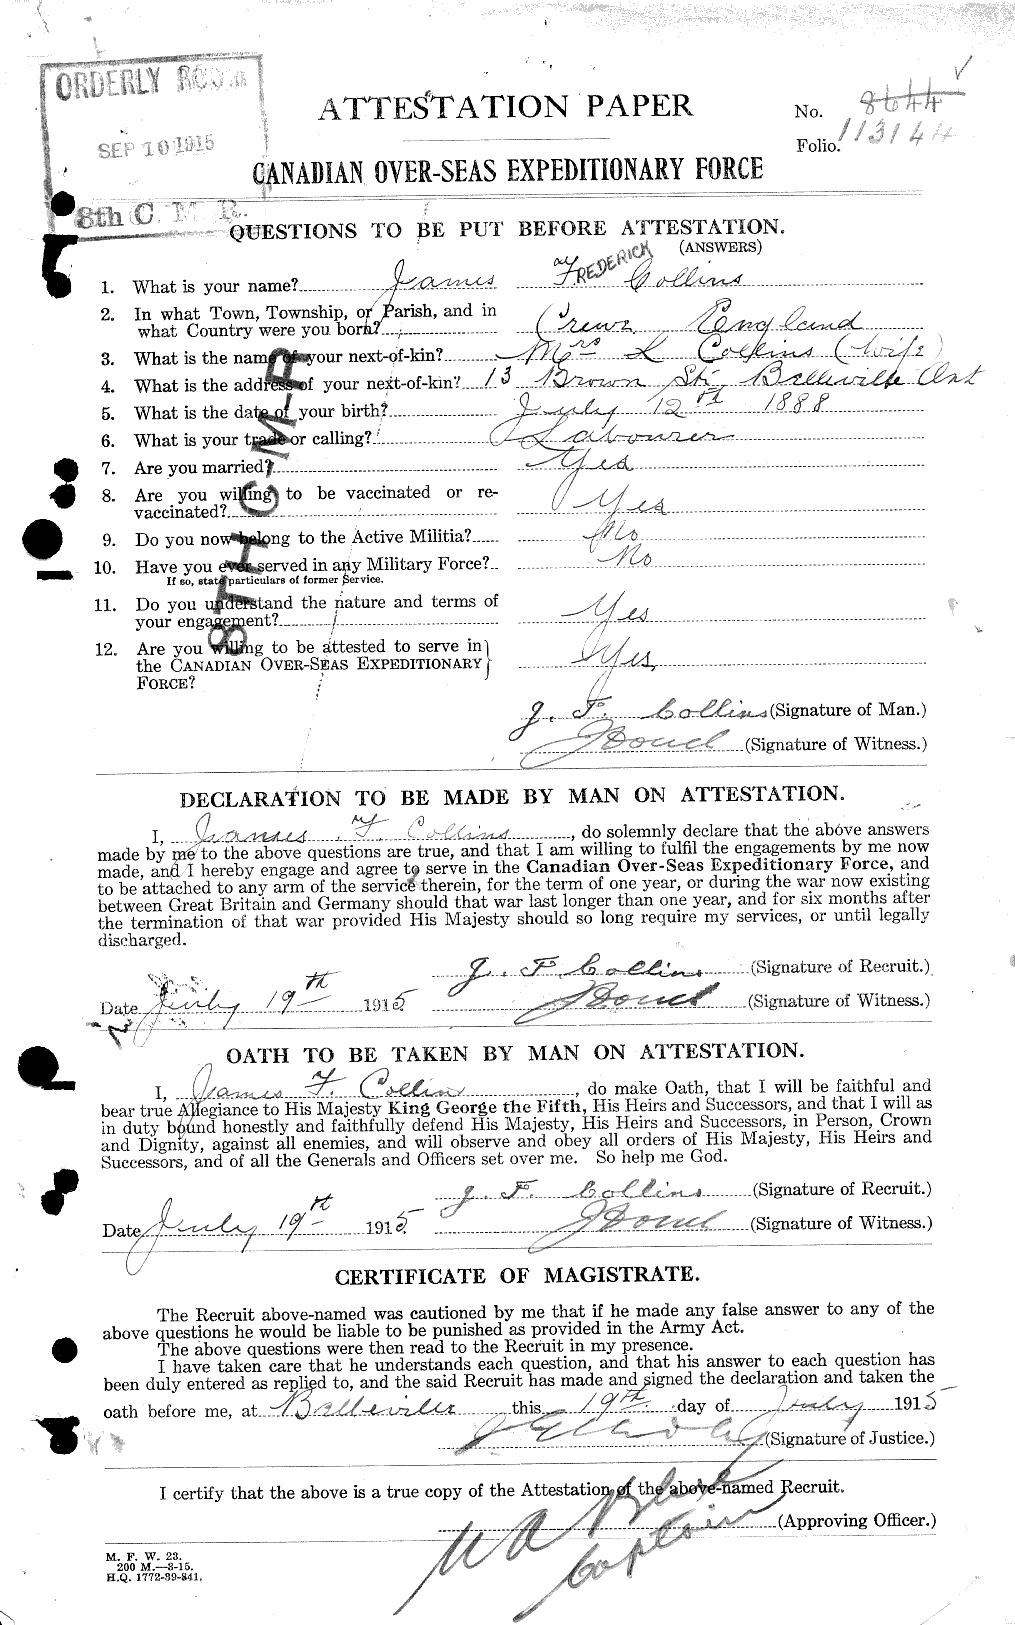 Personnel Records of the First World War - CEF 037934a